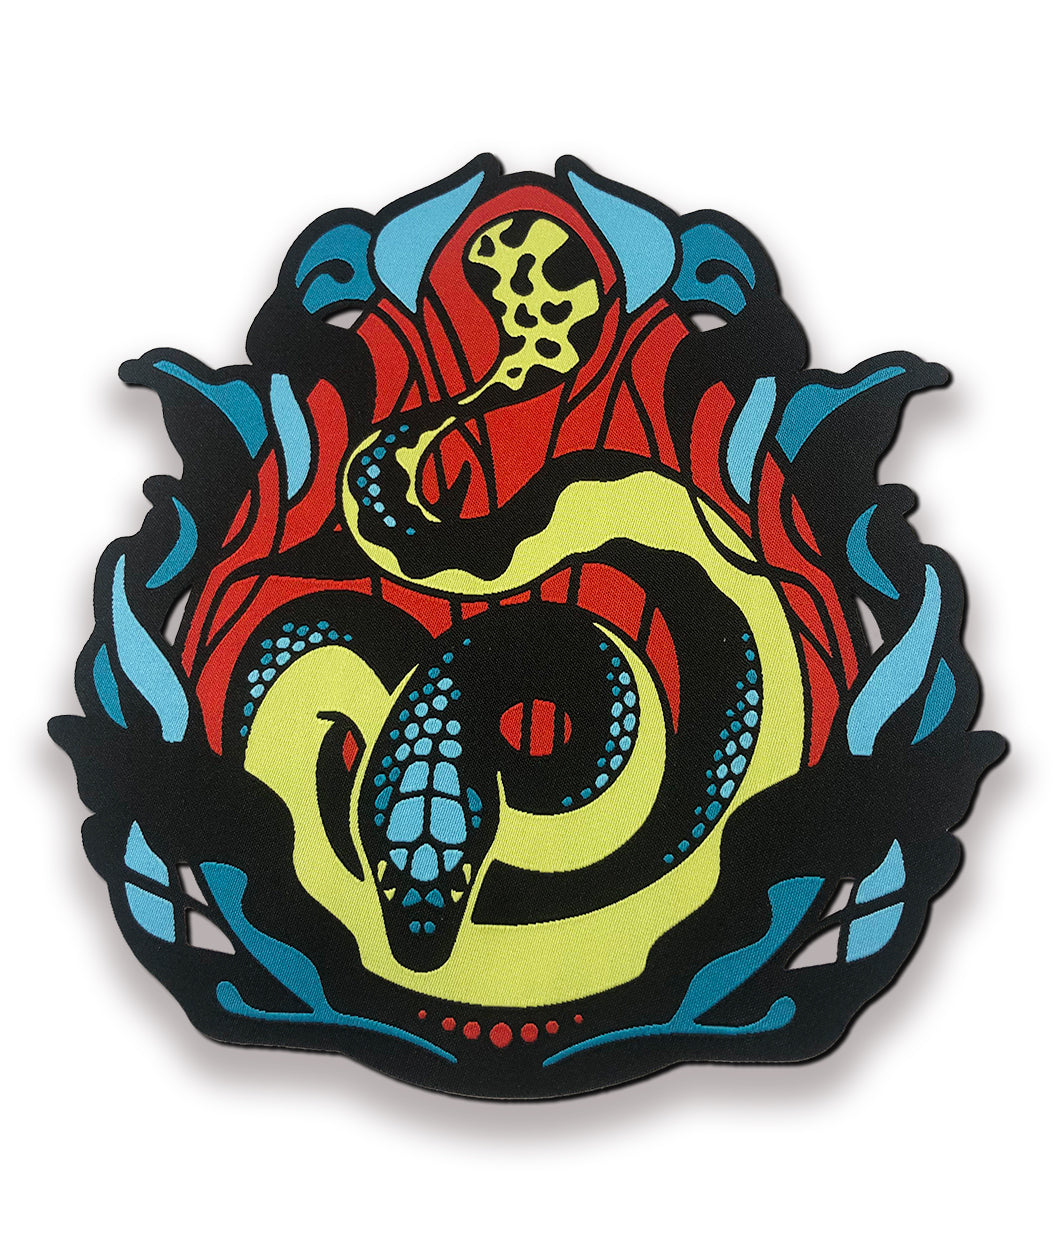 A patch from Bizarre Beasts featuring a blue and green sea snake surrounded by red and blue shapes.